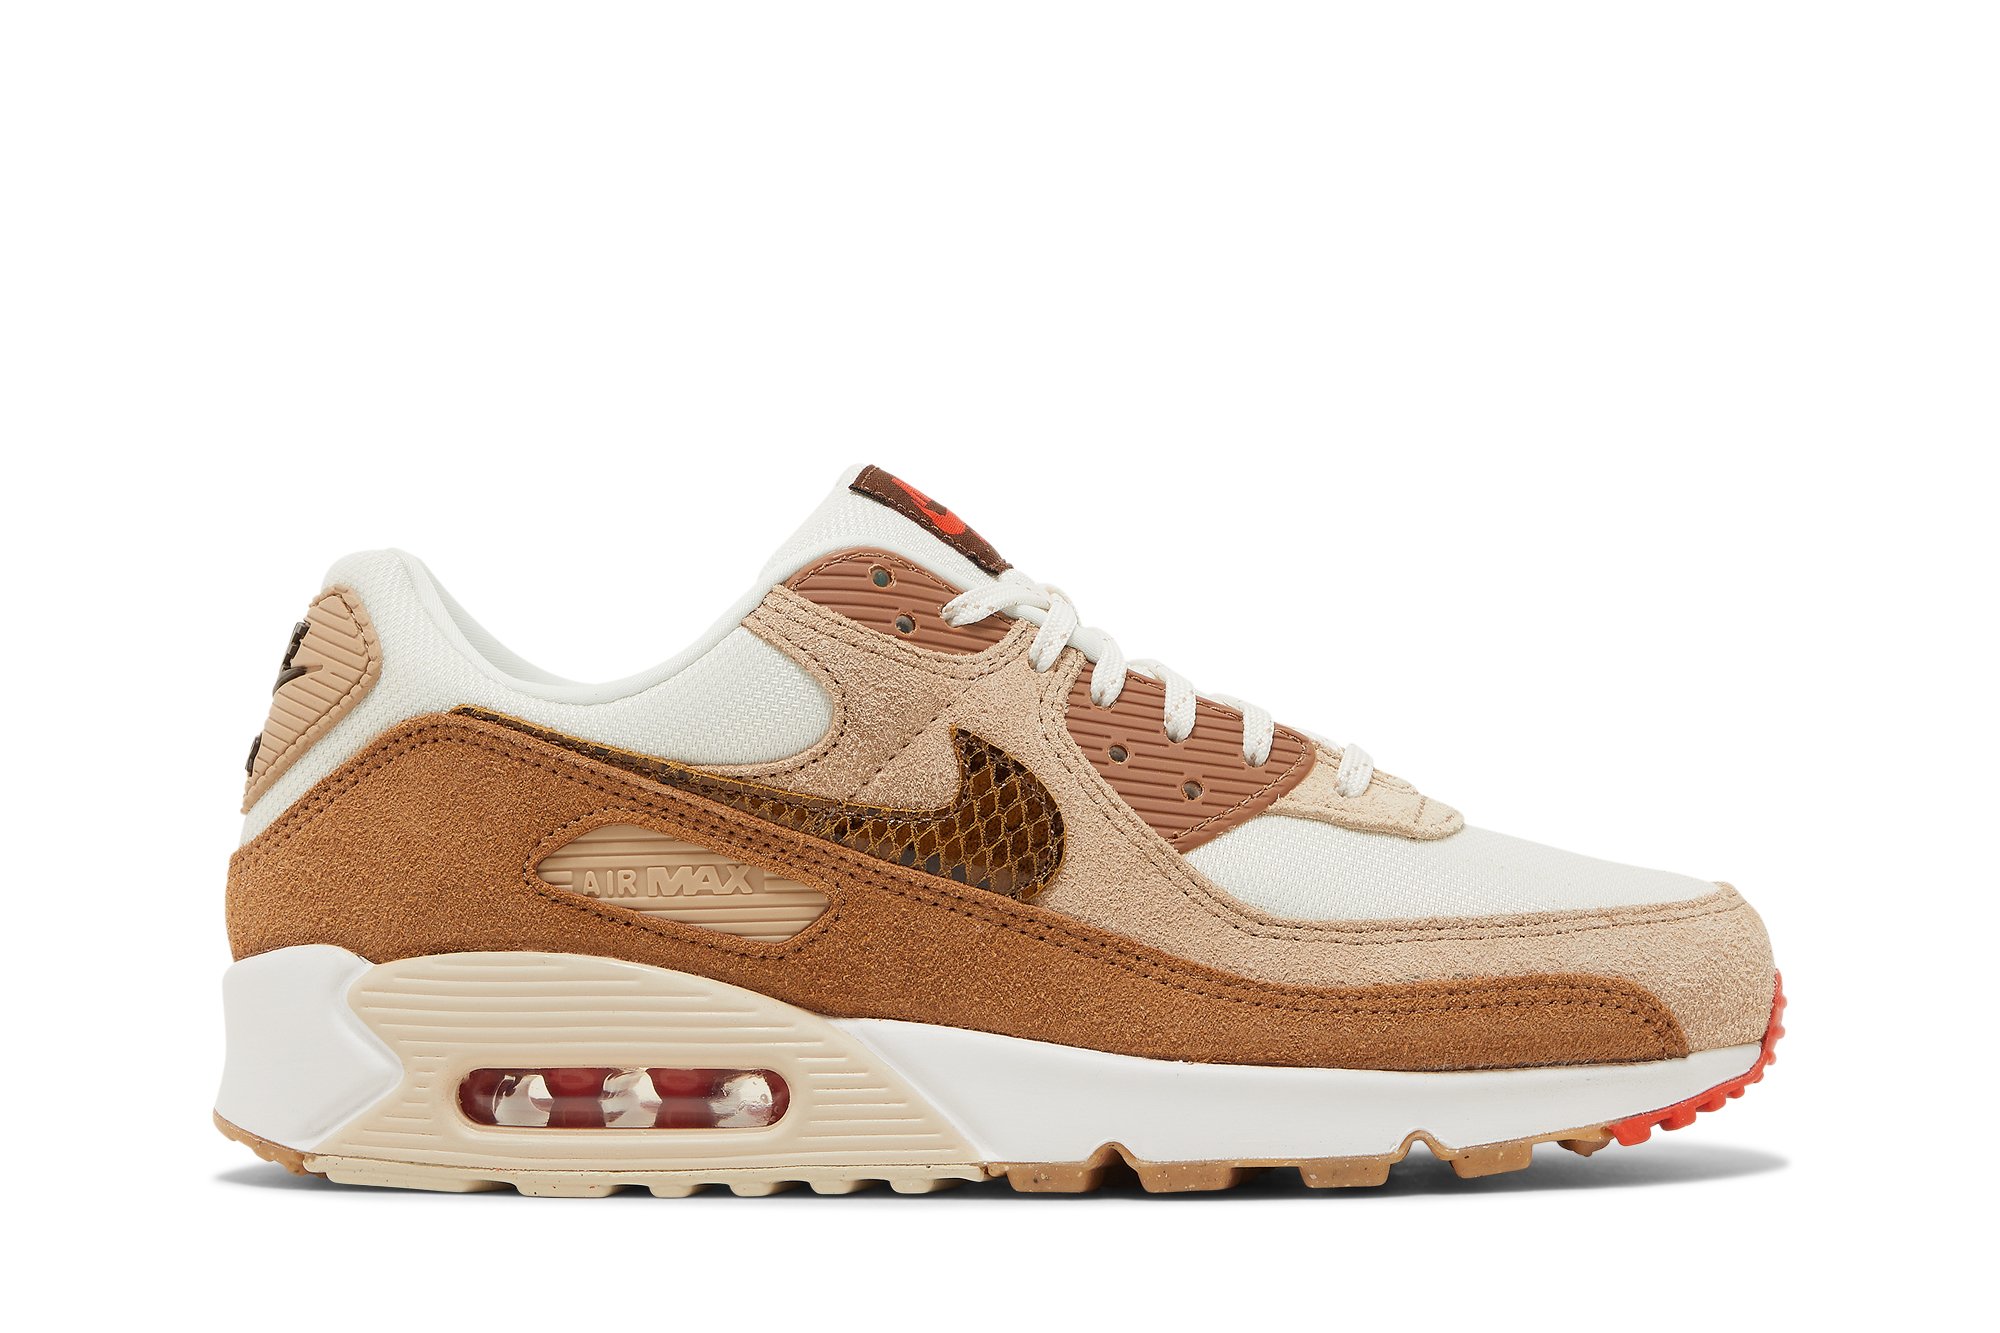 Buy Wmns Air Max 90 AMD 'Brown Snakeskin' - DX9502 100 | GOAT